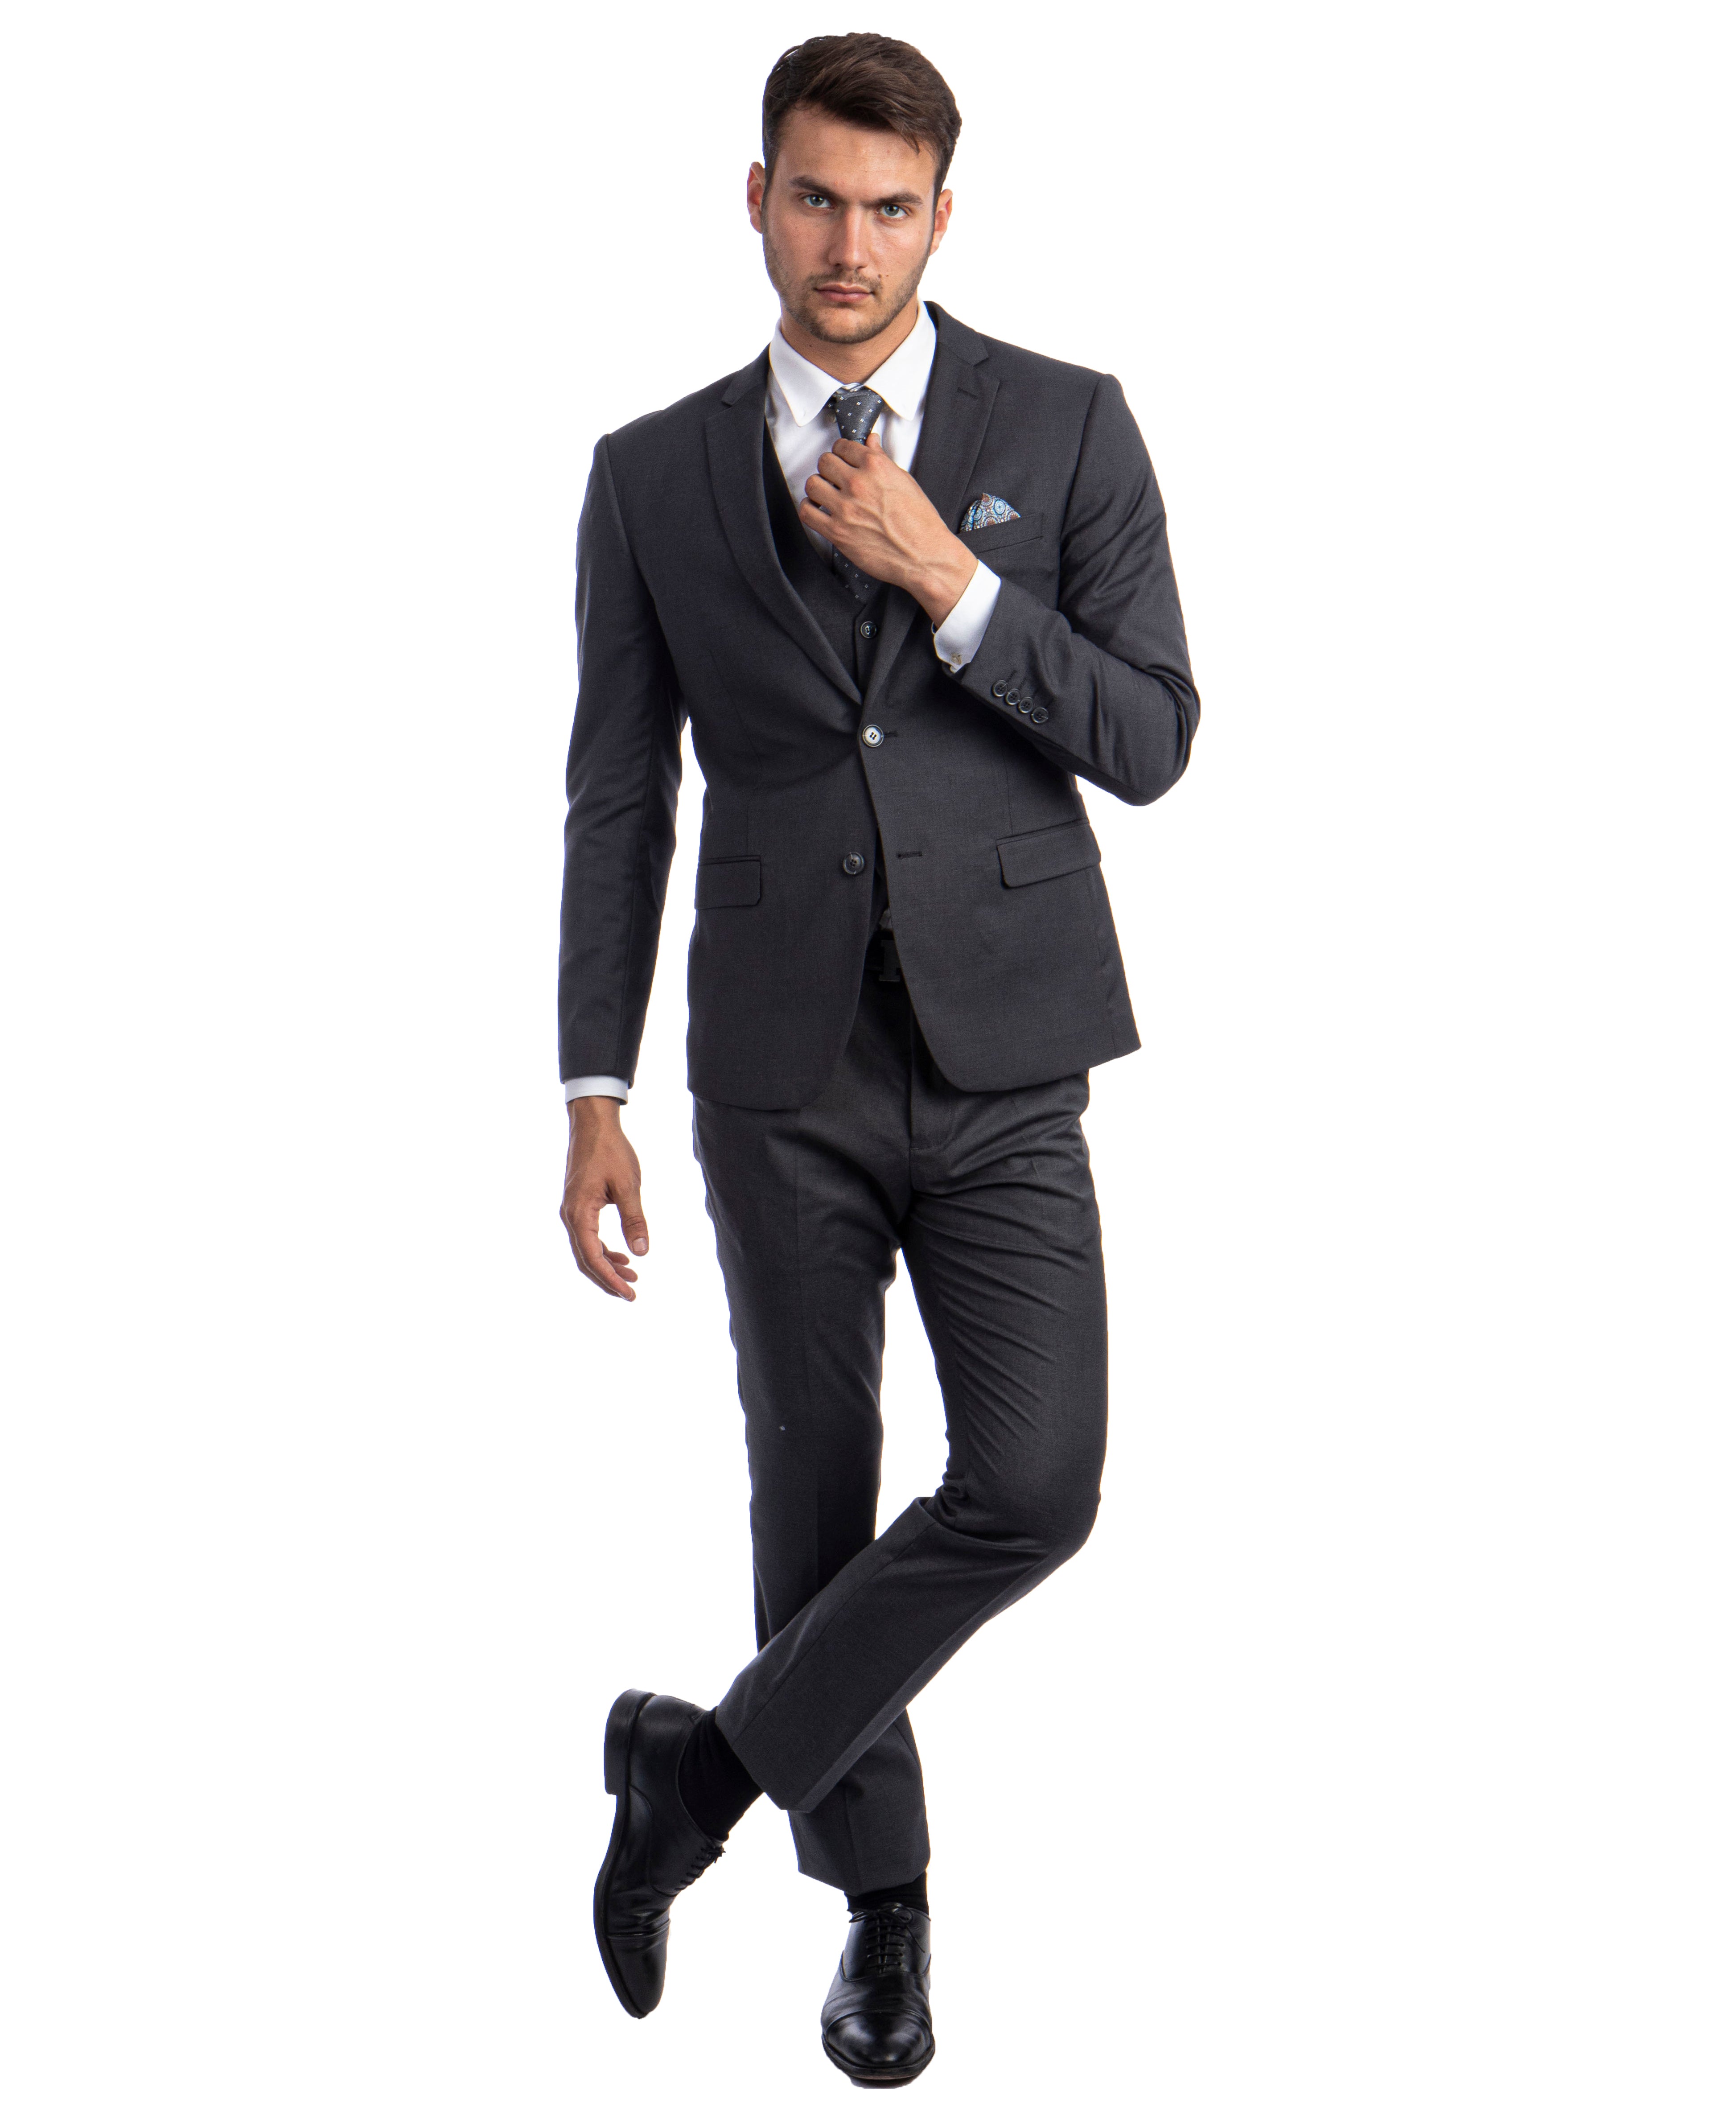 title:Sean Alexander Charcoal Gray 3 PC Solid Suit Skinny Fit Suits;color:Charcoal Gray